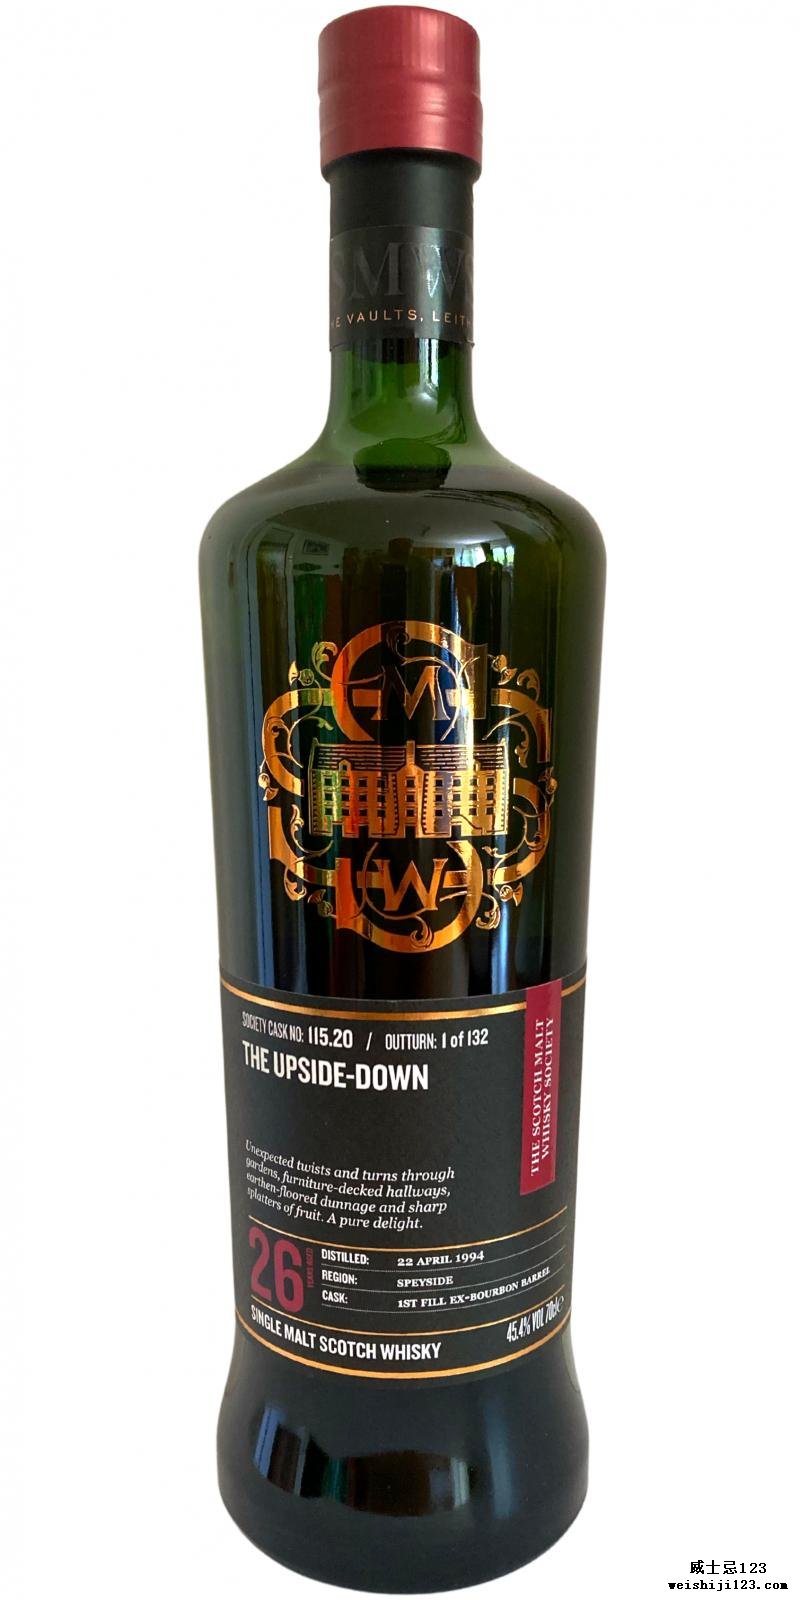 An Cnoc 1994 SMWS 115.20